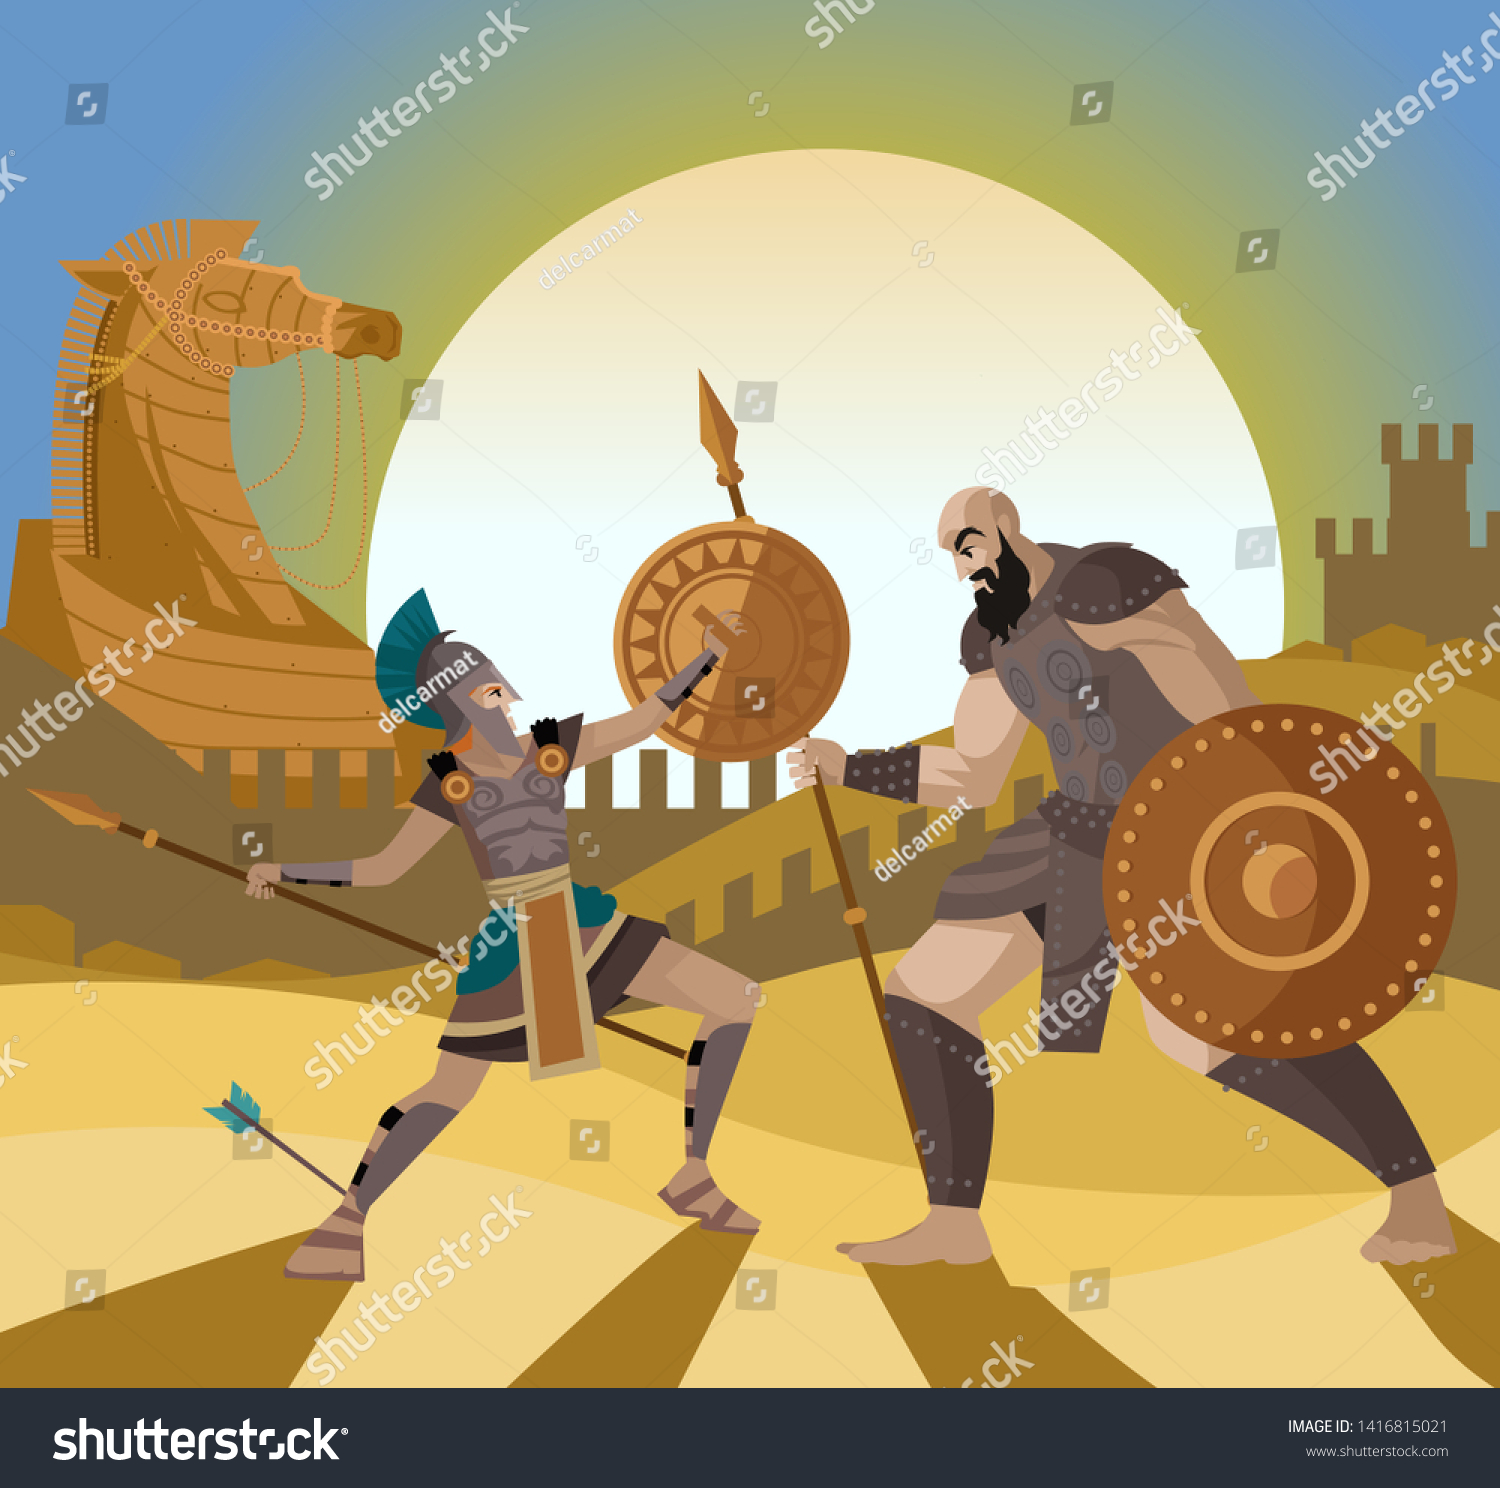 341 Clash of the titans Images, Stock Photos & Vectors | Shutterstock